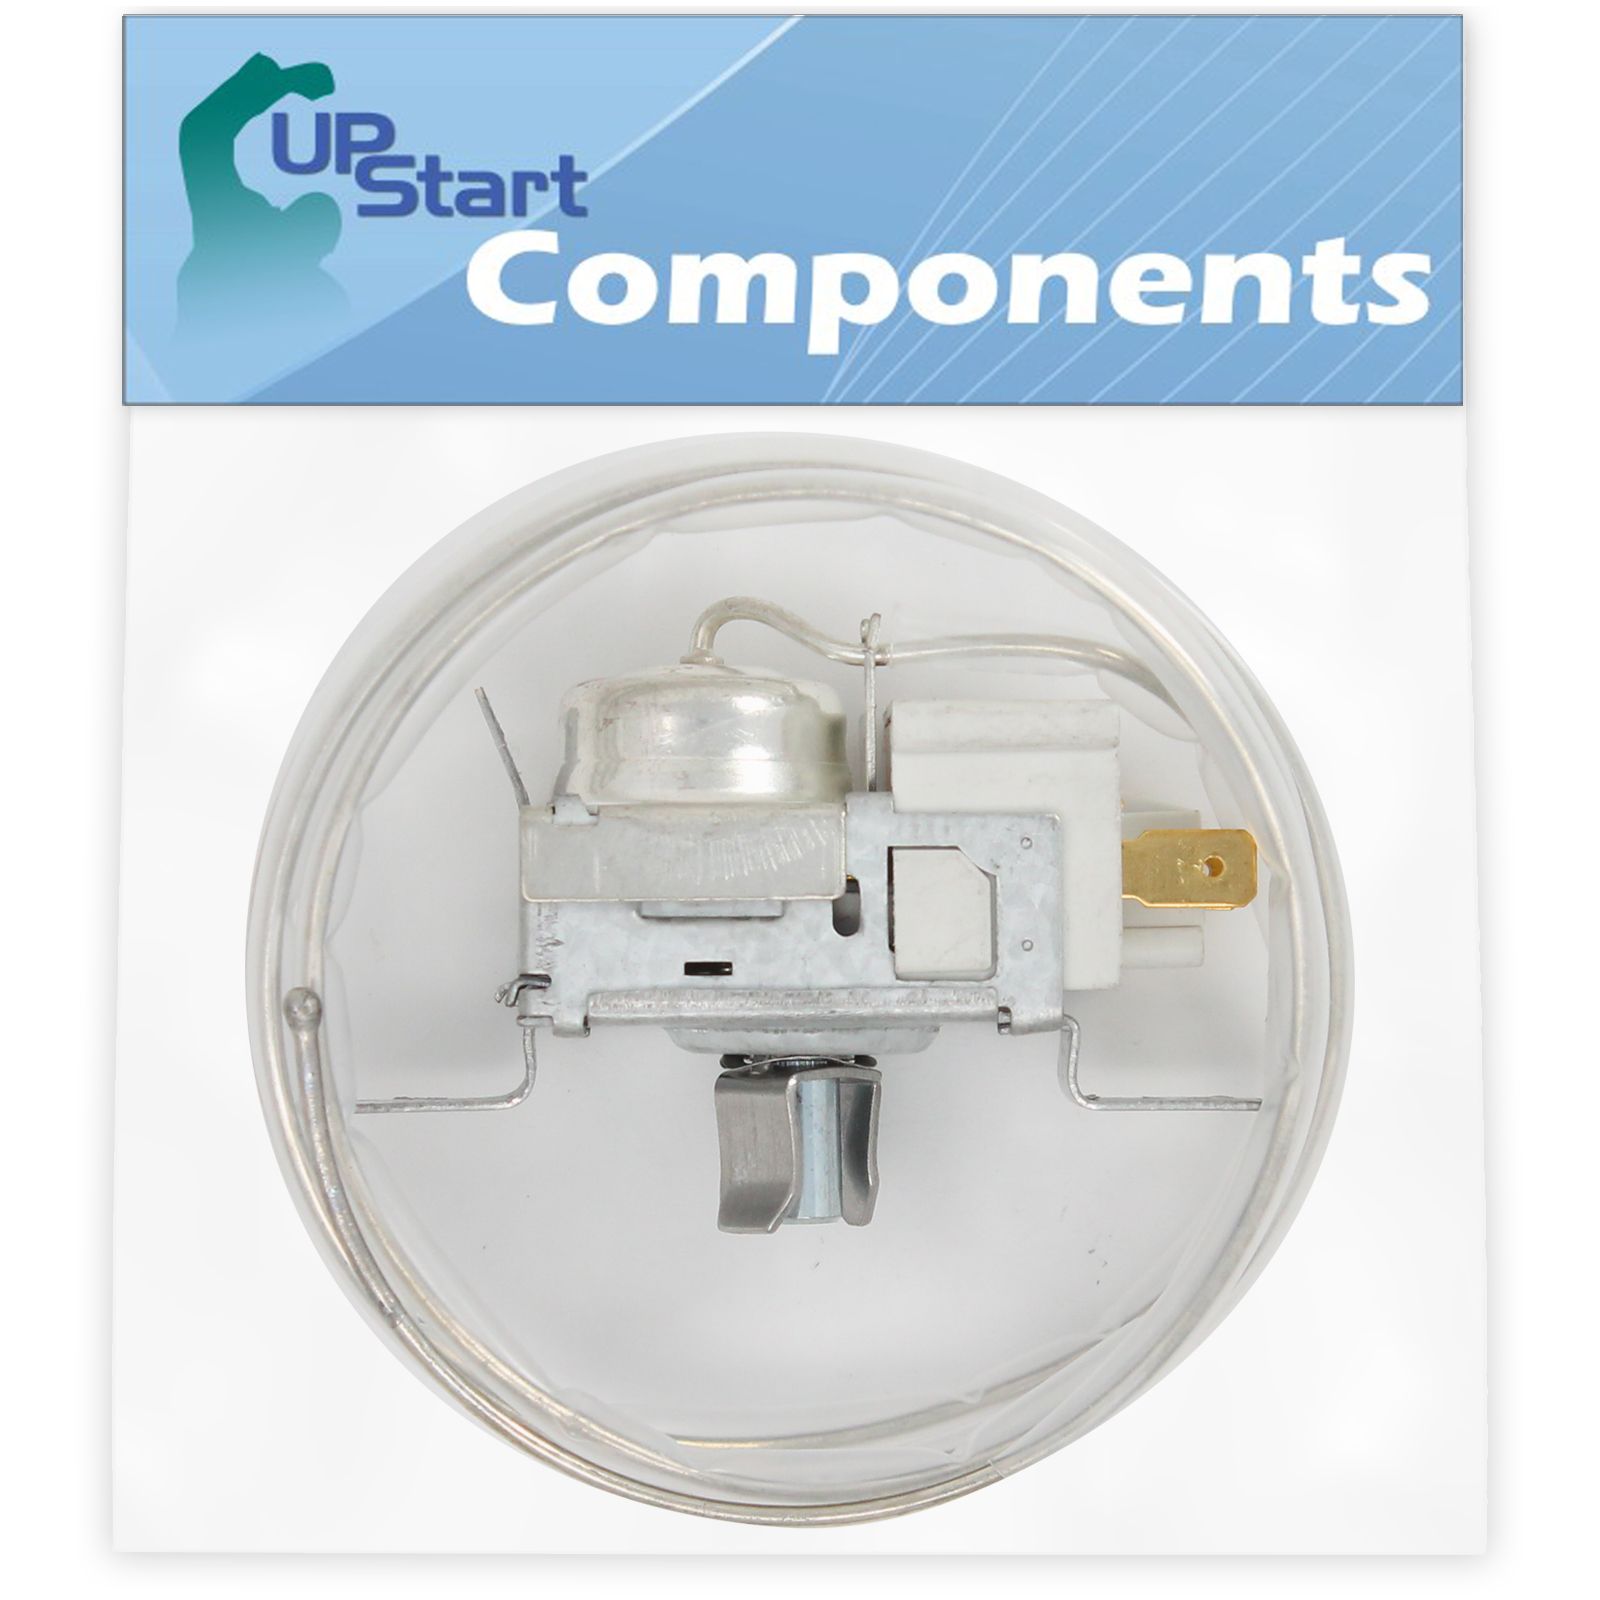 2198202 Cold Control Thermostat Replacement for Kenmore / Sears 1069557651 Refrigerator - Compatible with WP2198202 Refrigerator Temperature Control Thermostat - UpStart Components Brand - image 1 of 3